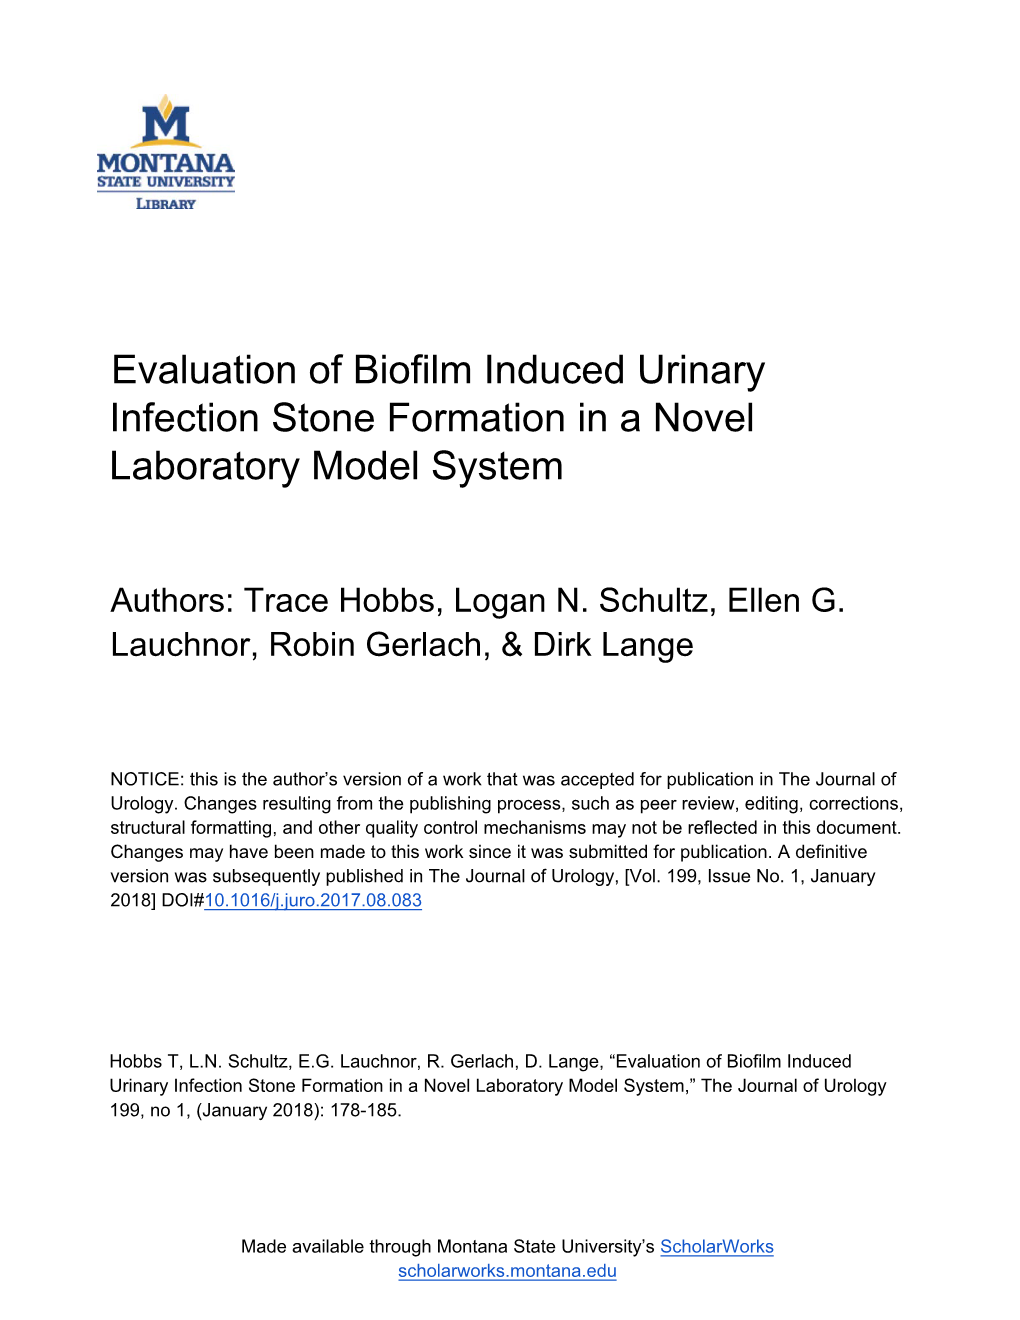 Evaluation of Biofilm Induced Urinary Infection Stone Formation in a Novel Laboratory Model System